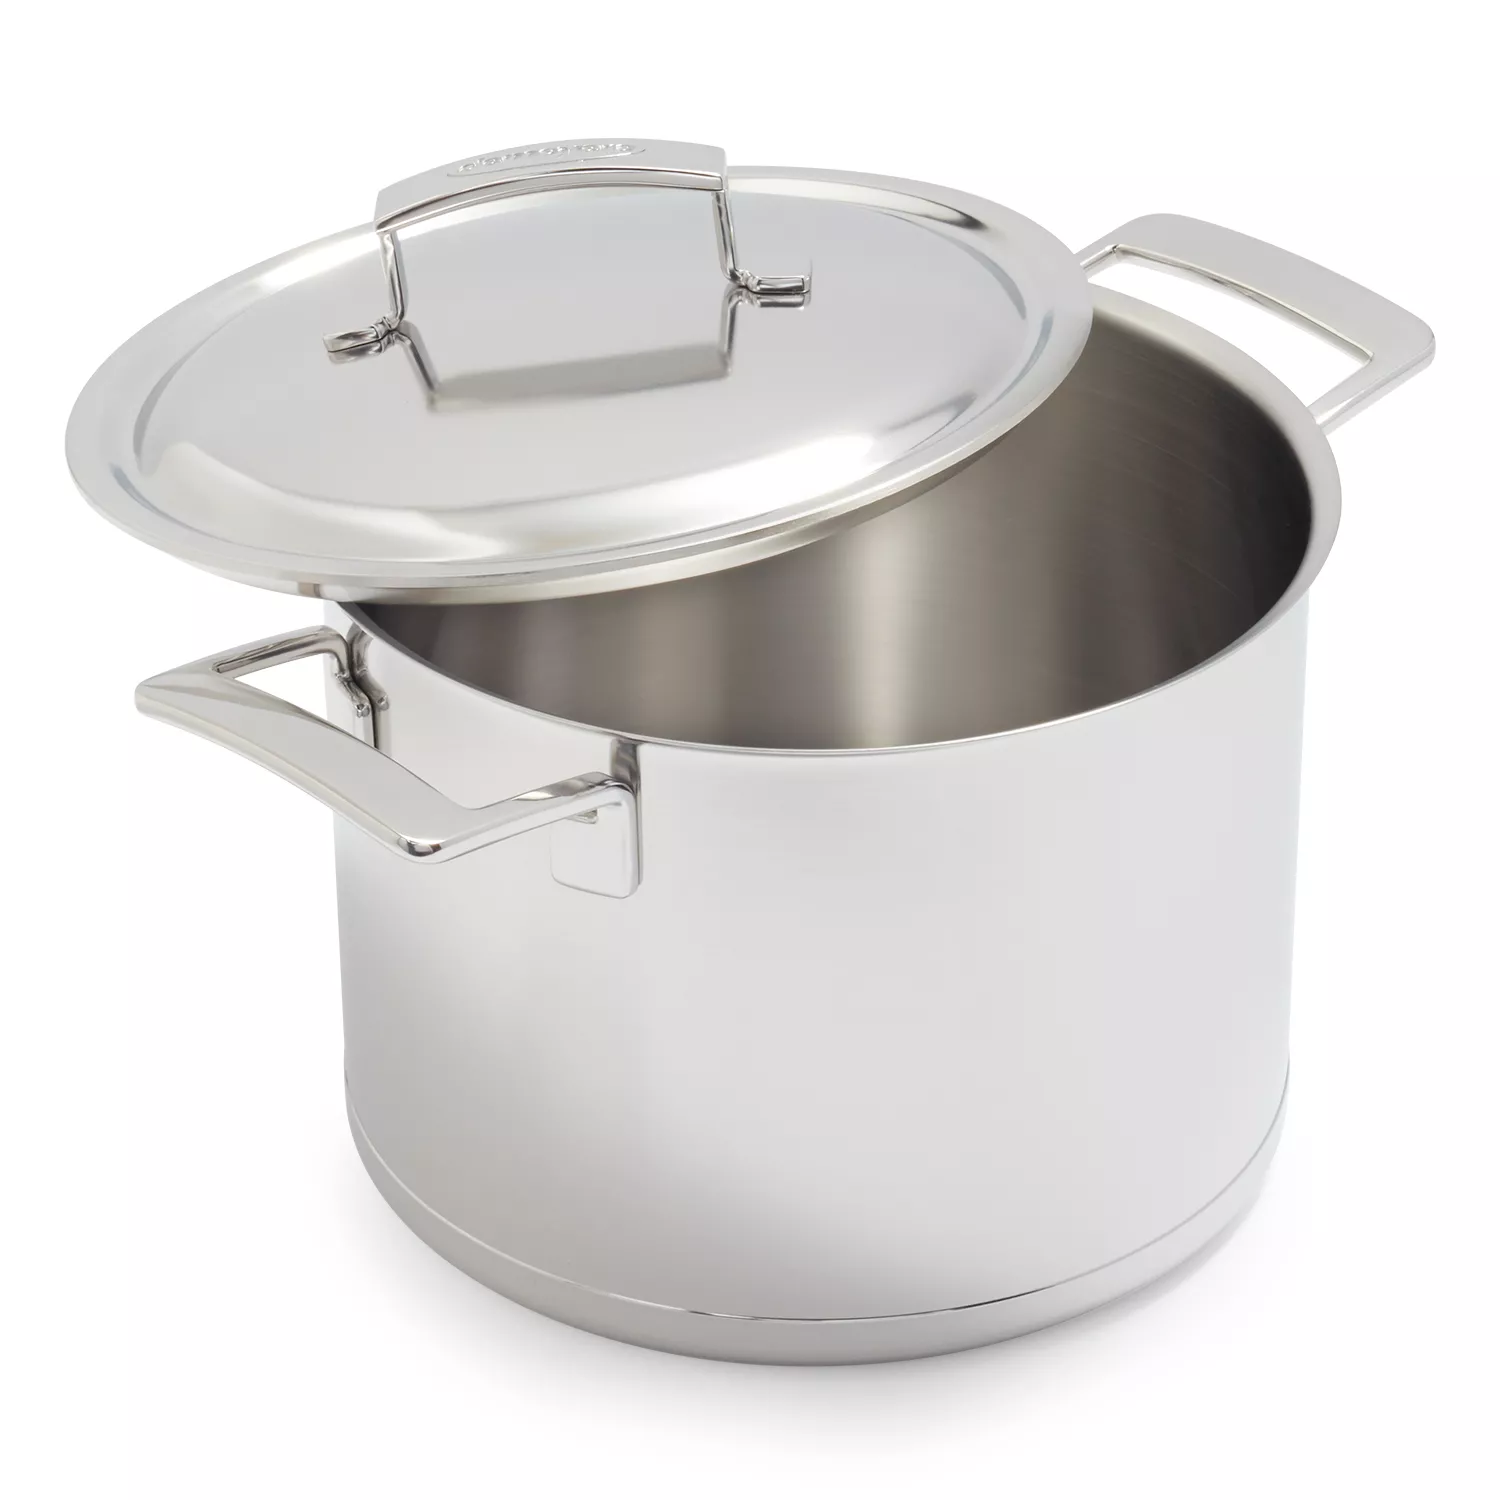 8-Quart Pot Stainless Steel with Lid